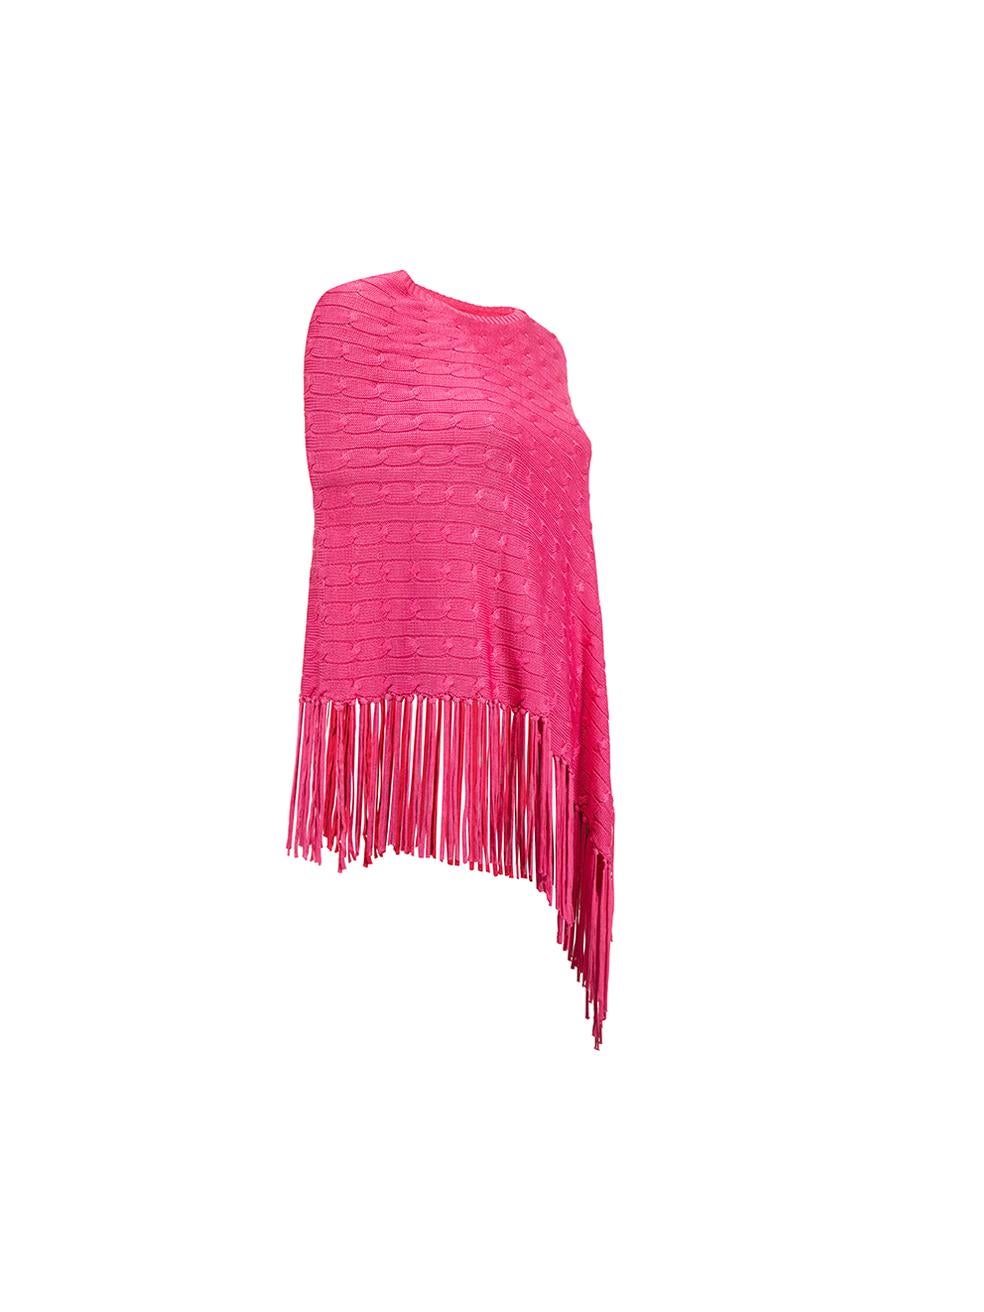 CONDITION is Very good. Minimal wear to poncho is evident. Minimal wear loose threads to the tassels at the bottom of this used Ralph Lauren designer resale item. 
 
 Details
  Pink
 Synthetic
 Poncho
 Asymmetric knit design
 Tassel finishing
 
 
